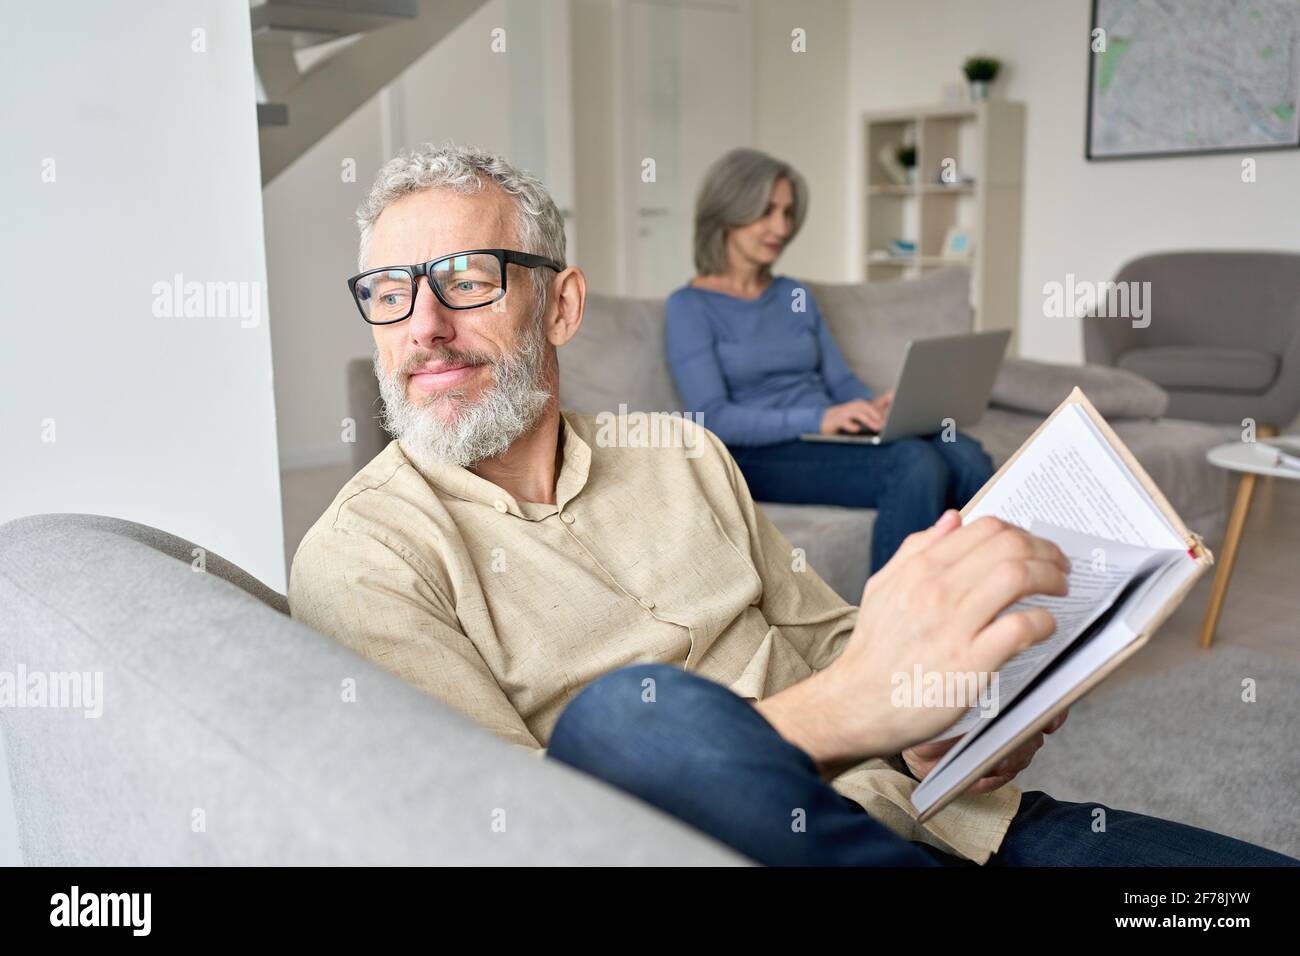 Happy older senior man husband reading book relaxing sitting on couch at home. Stock Photo